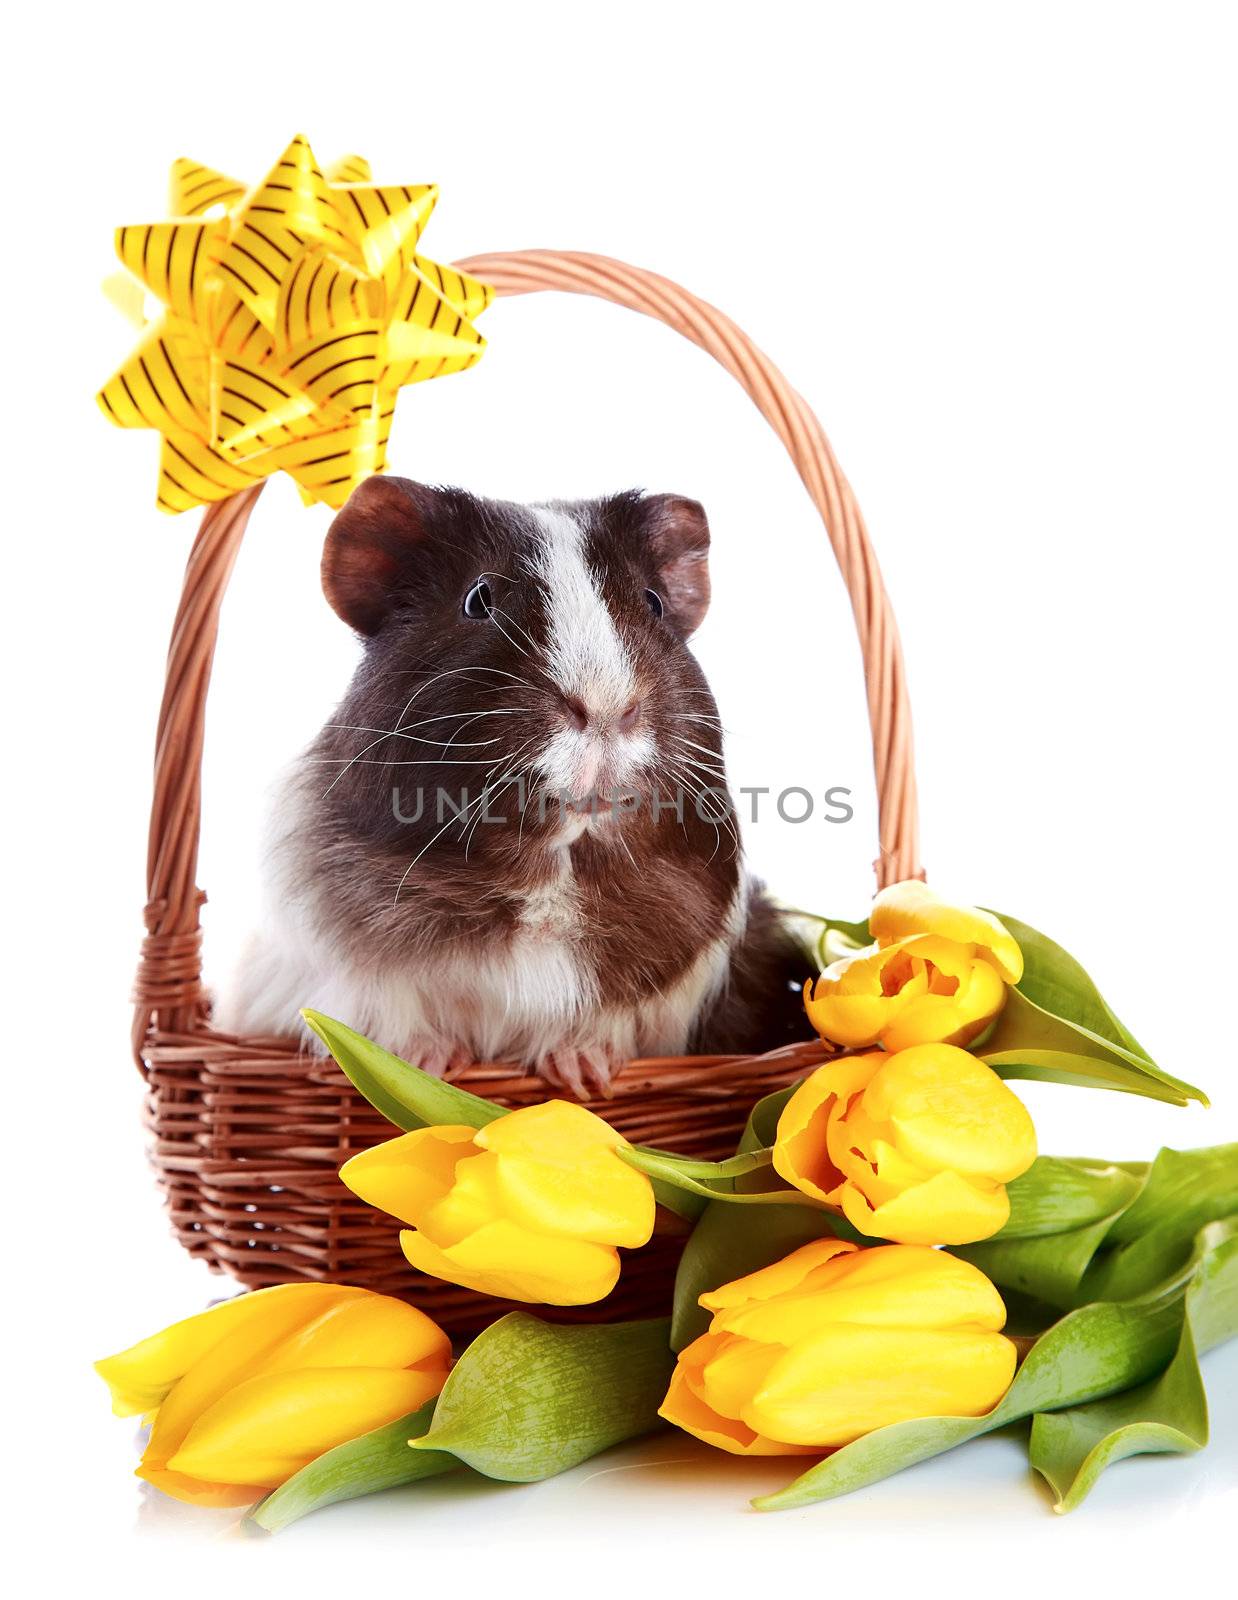 Guinea pig in a basket. Guinea pig with tulips. Guinea pig and flowers. Small pet. Live gift.